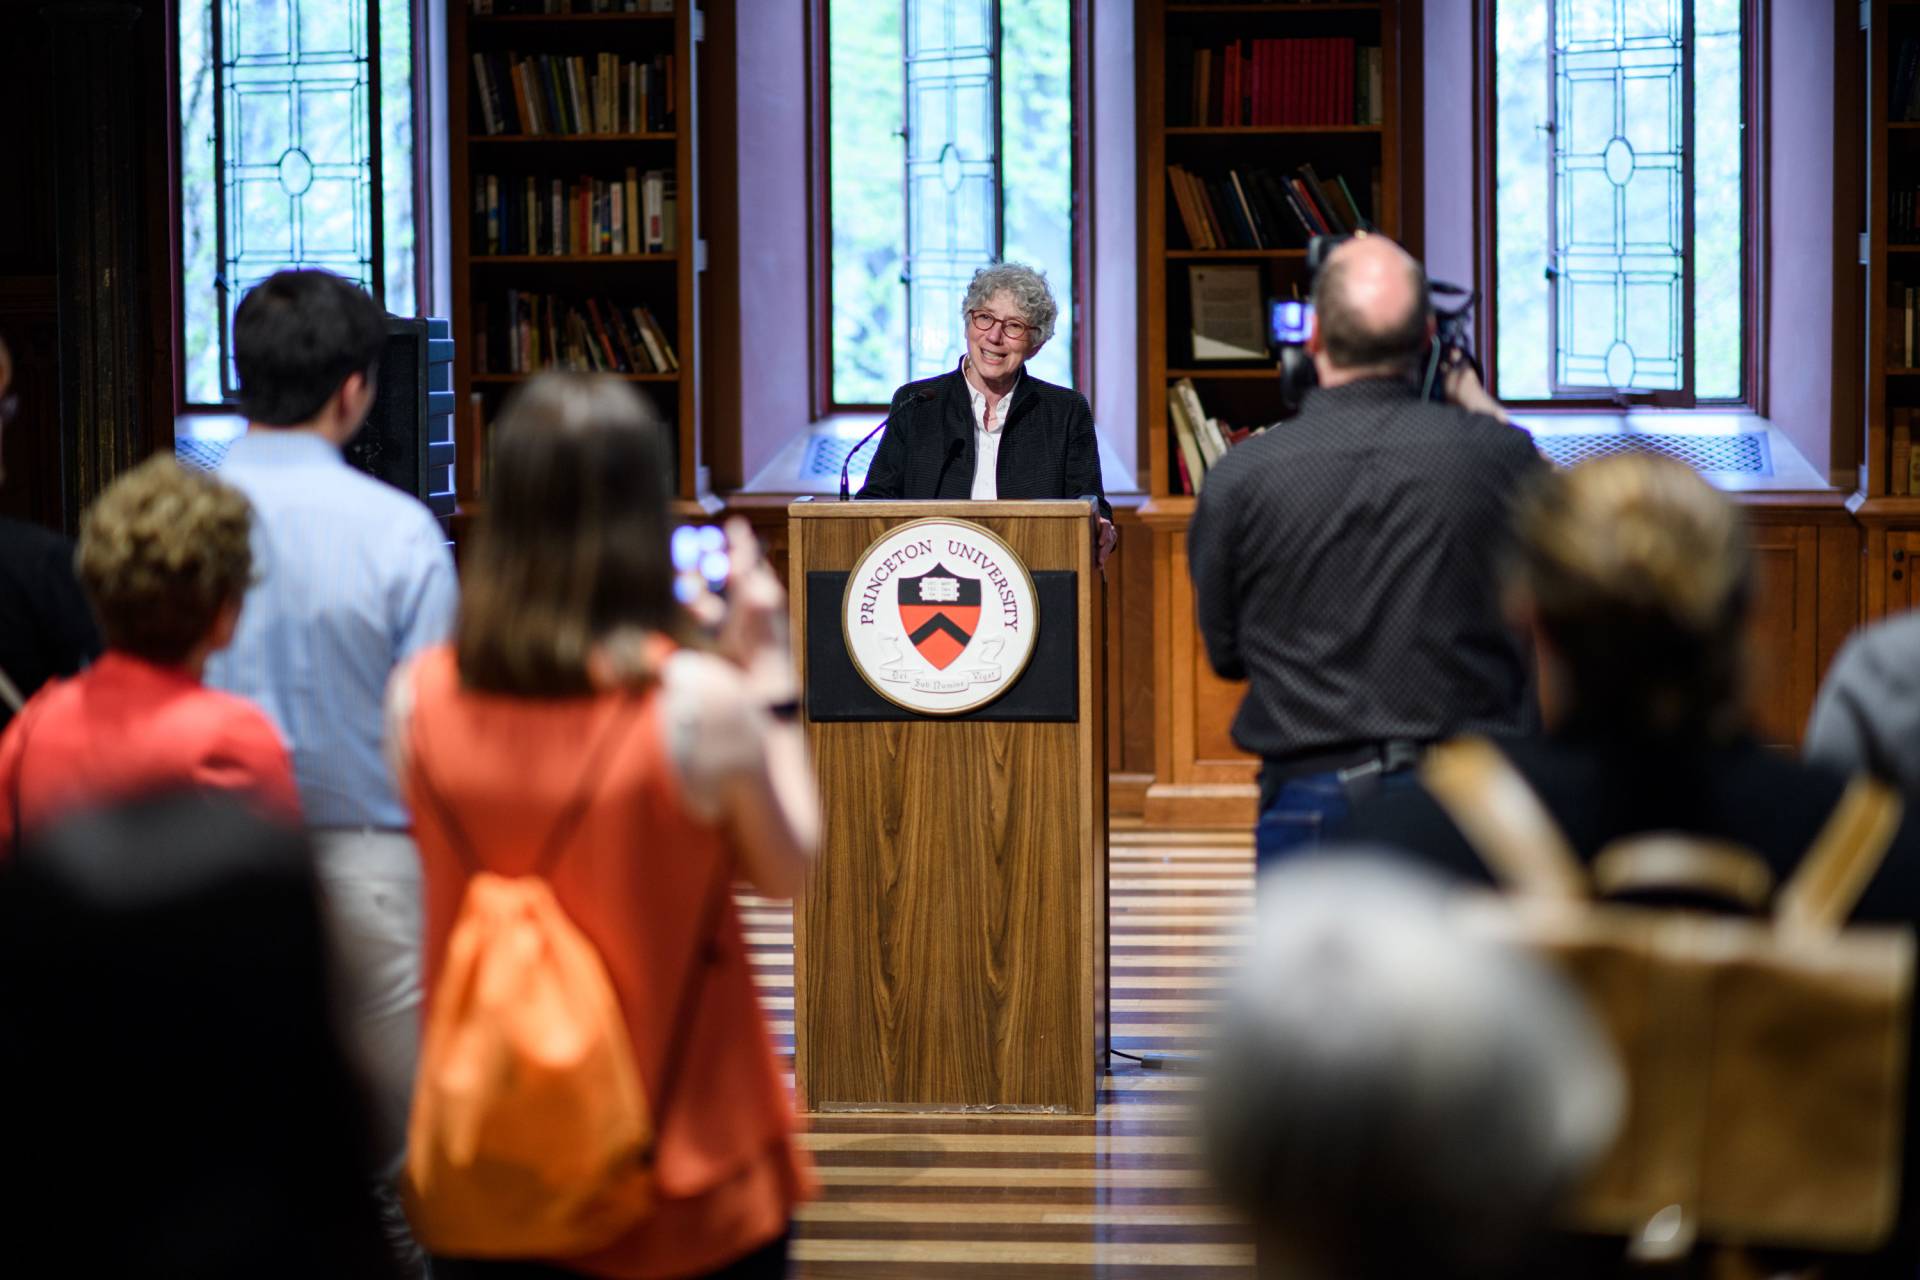 Jill Dolan stands at a podium and speaks to crowd at Celebrating Service at Princeton